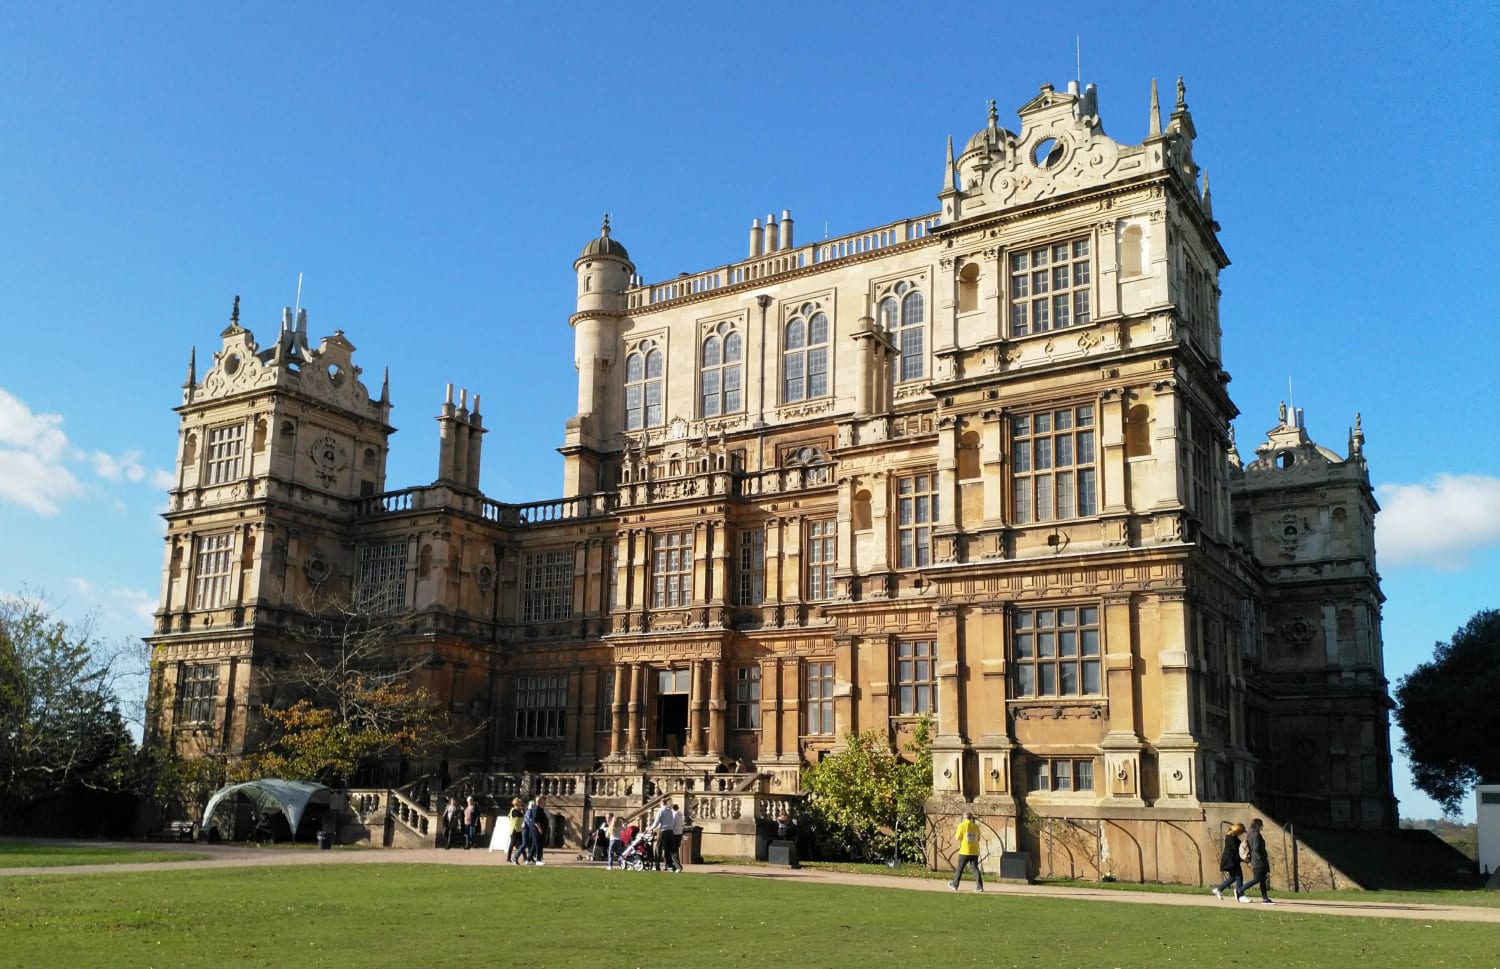 Wollaton Hall, Nottingham. 16th-century, English Renaissance style mansion housing natural history museum, set in parkland.